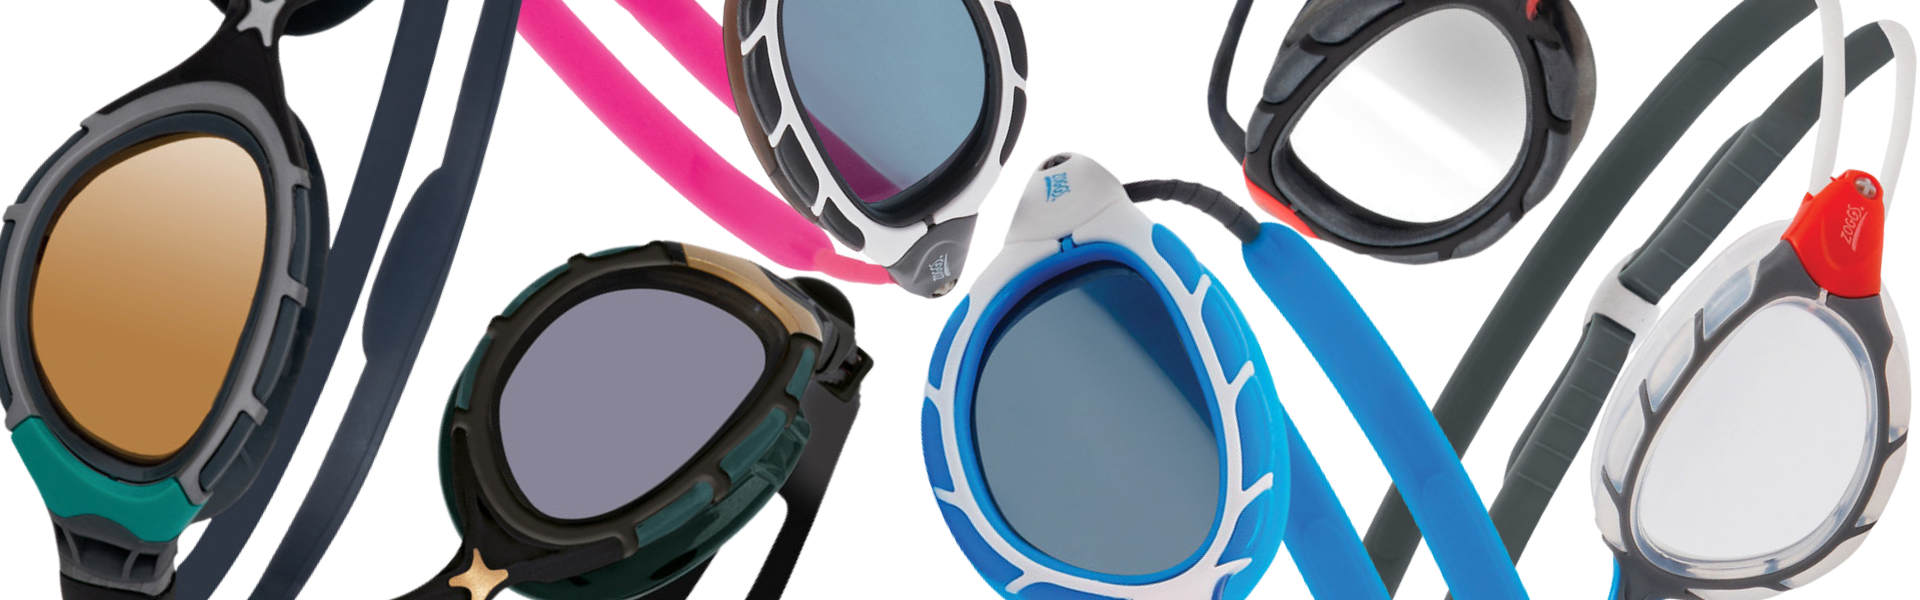 collection of swimming goggles with mirror, colour, clear and polarized lenses